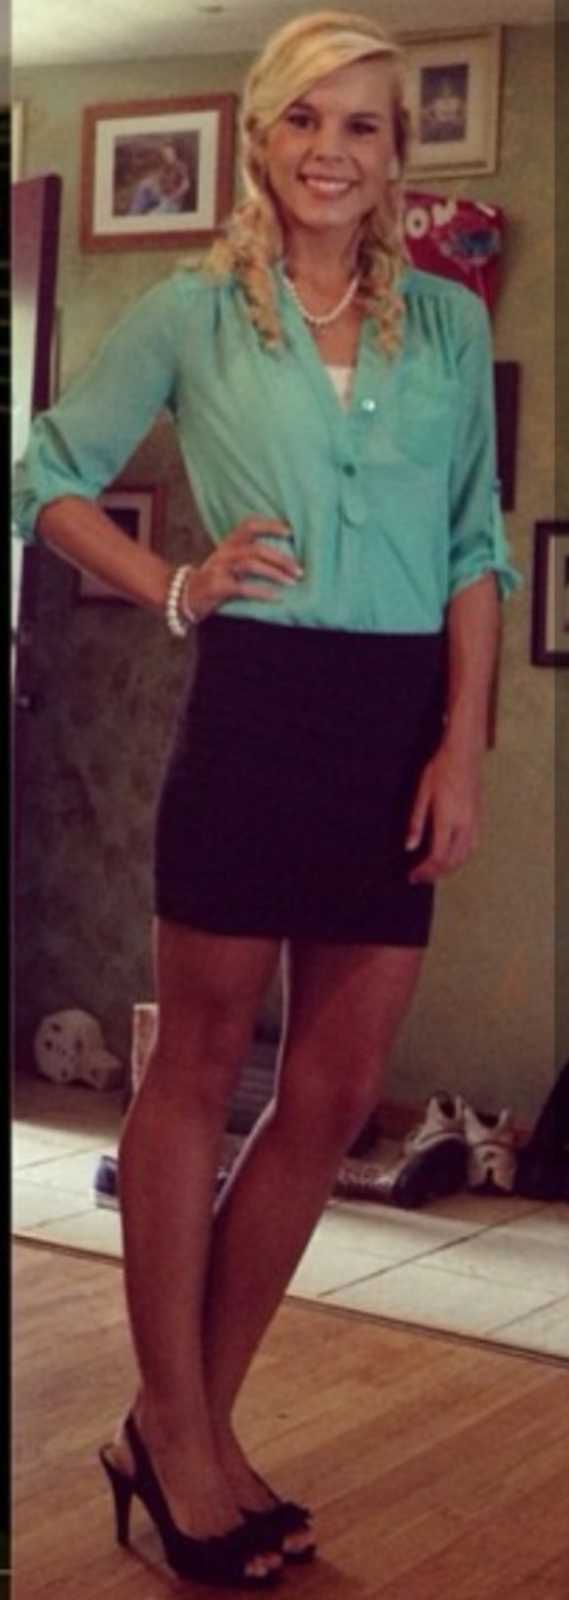 Young woman smiles for a photo in turquoise button-down shirt and black pencil skirt